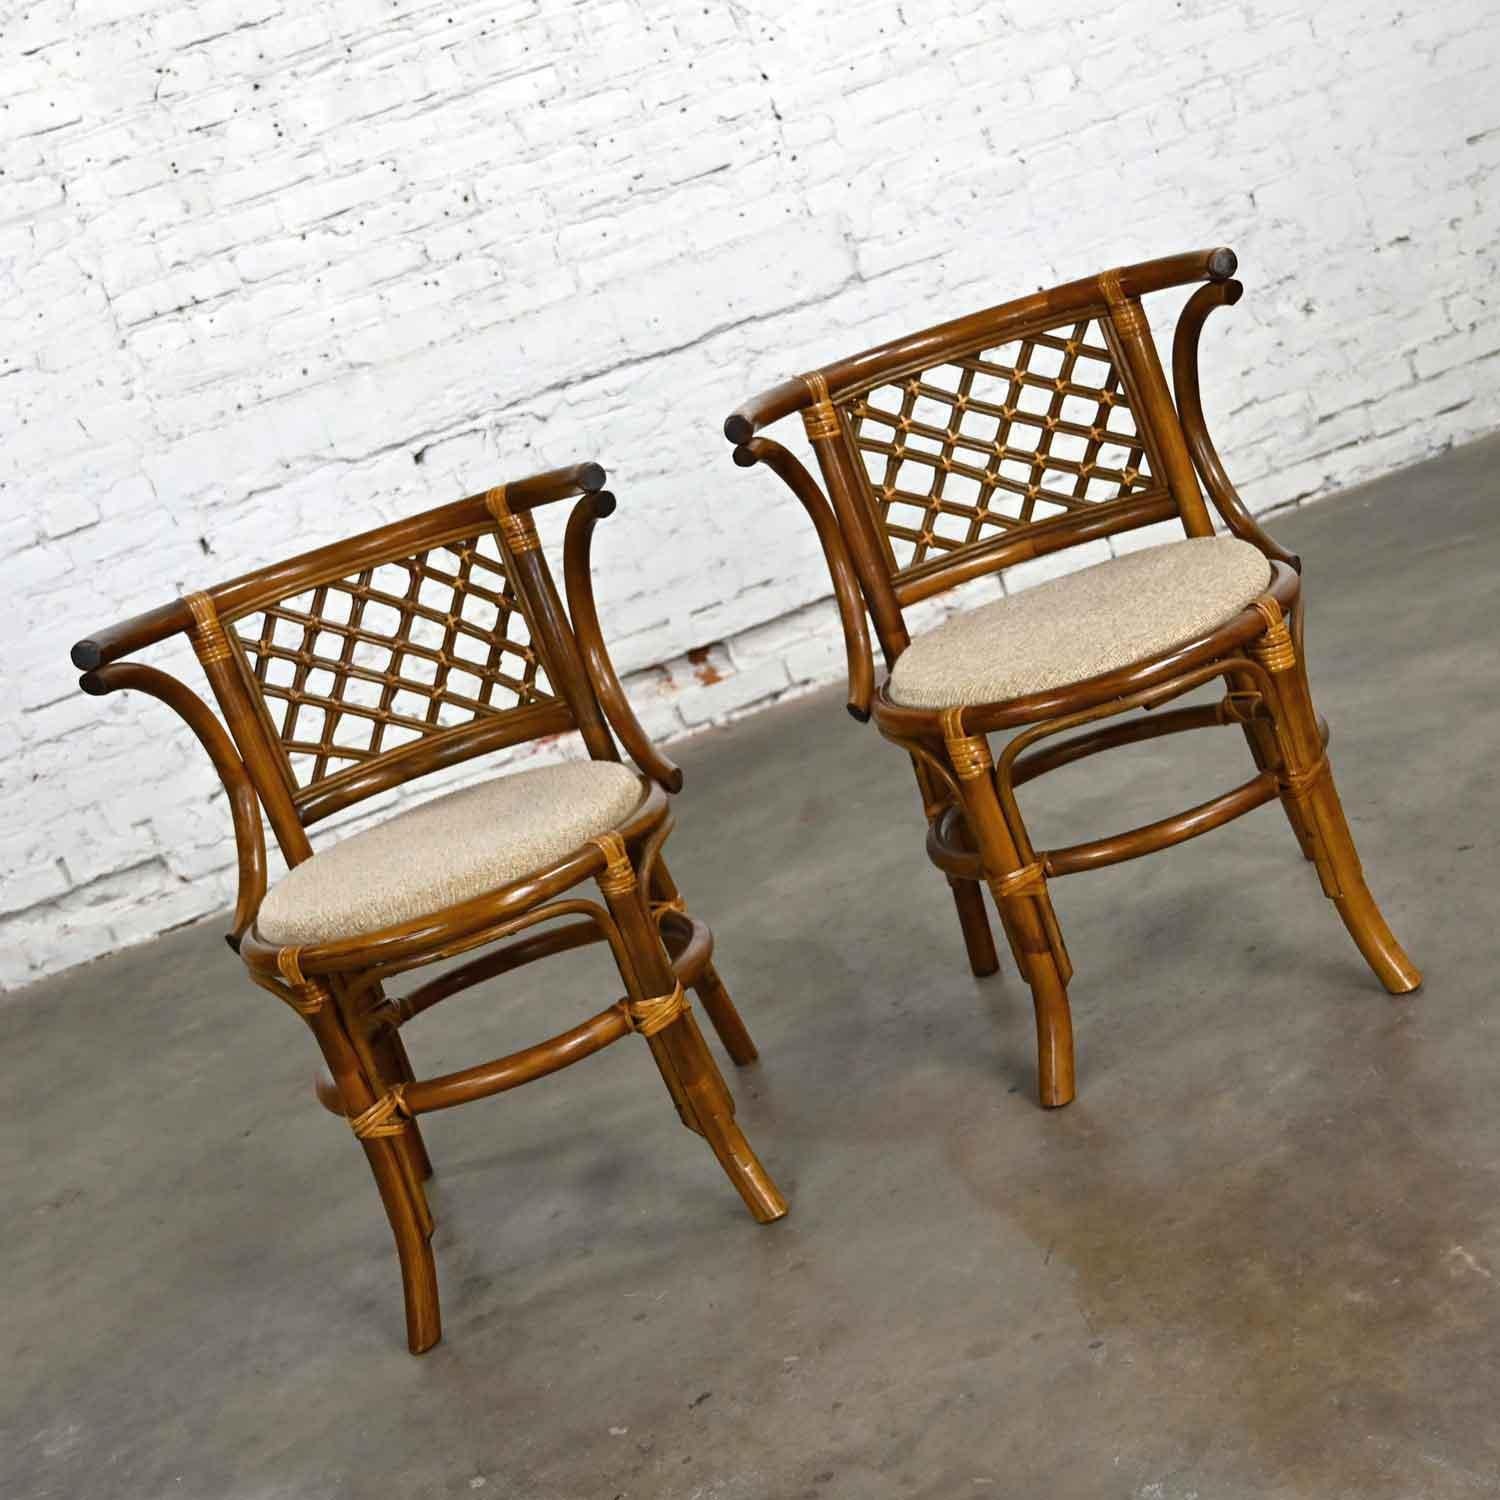 Unknown Vintage Rattan & Cane Pair of Side Chairs Woven Diamond Yoke Back Off-White Twee